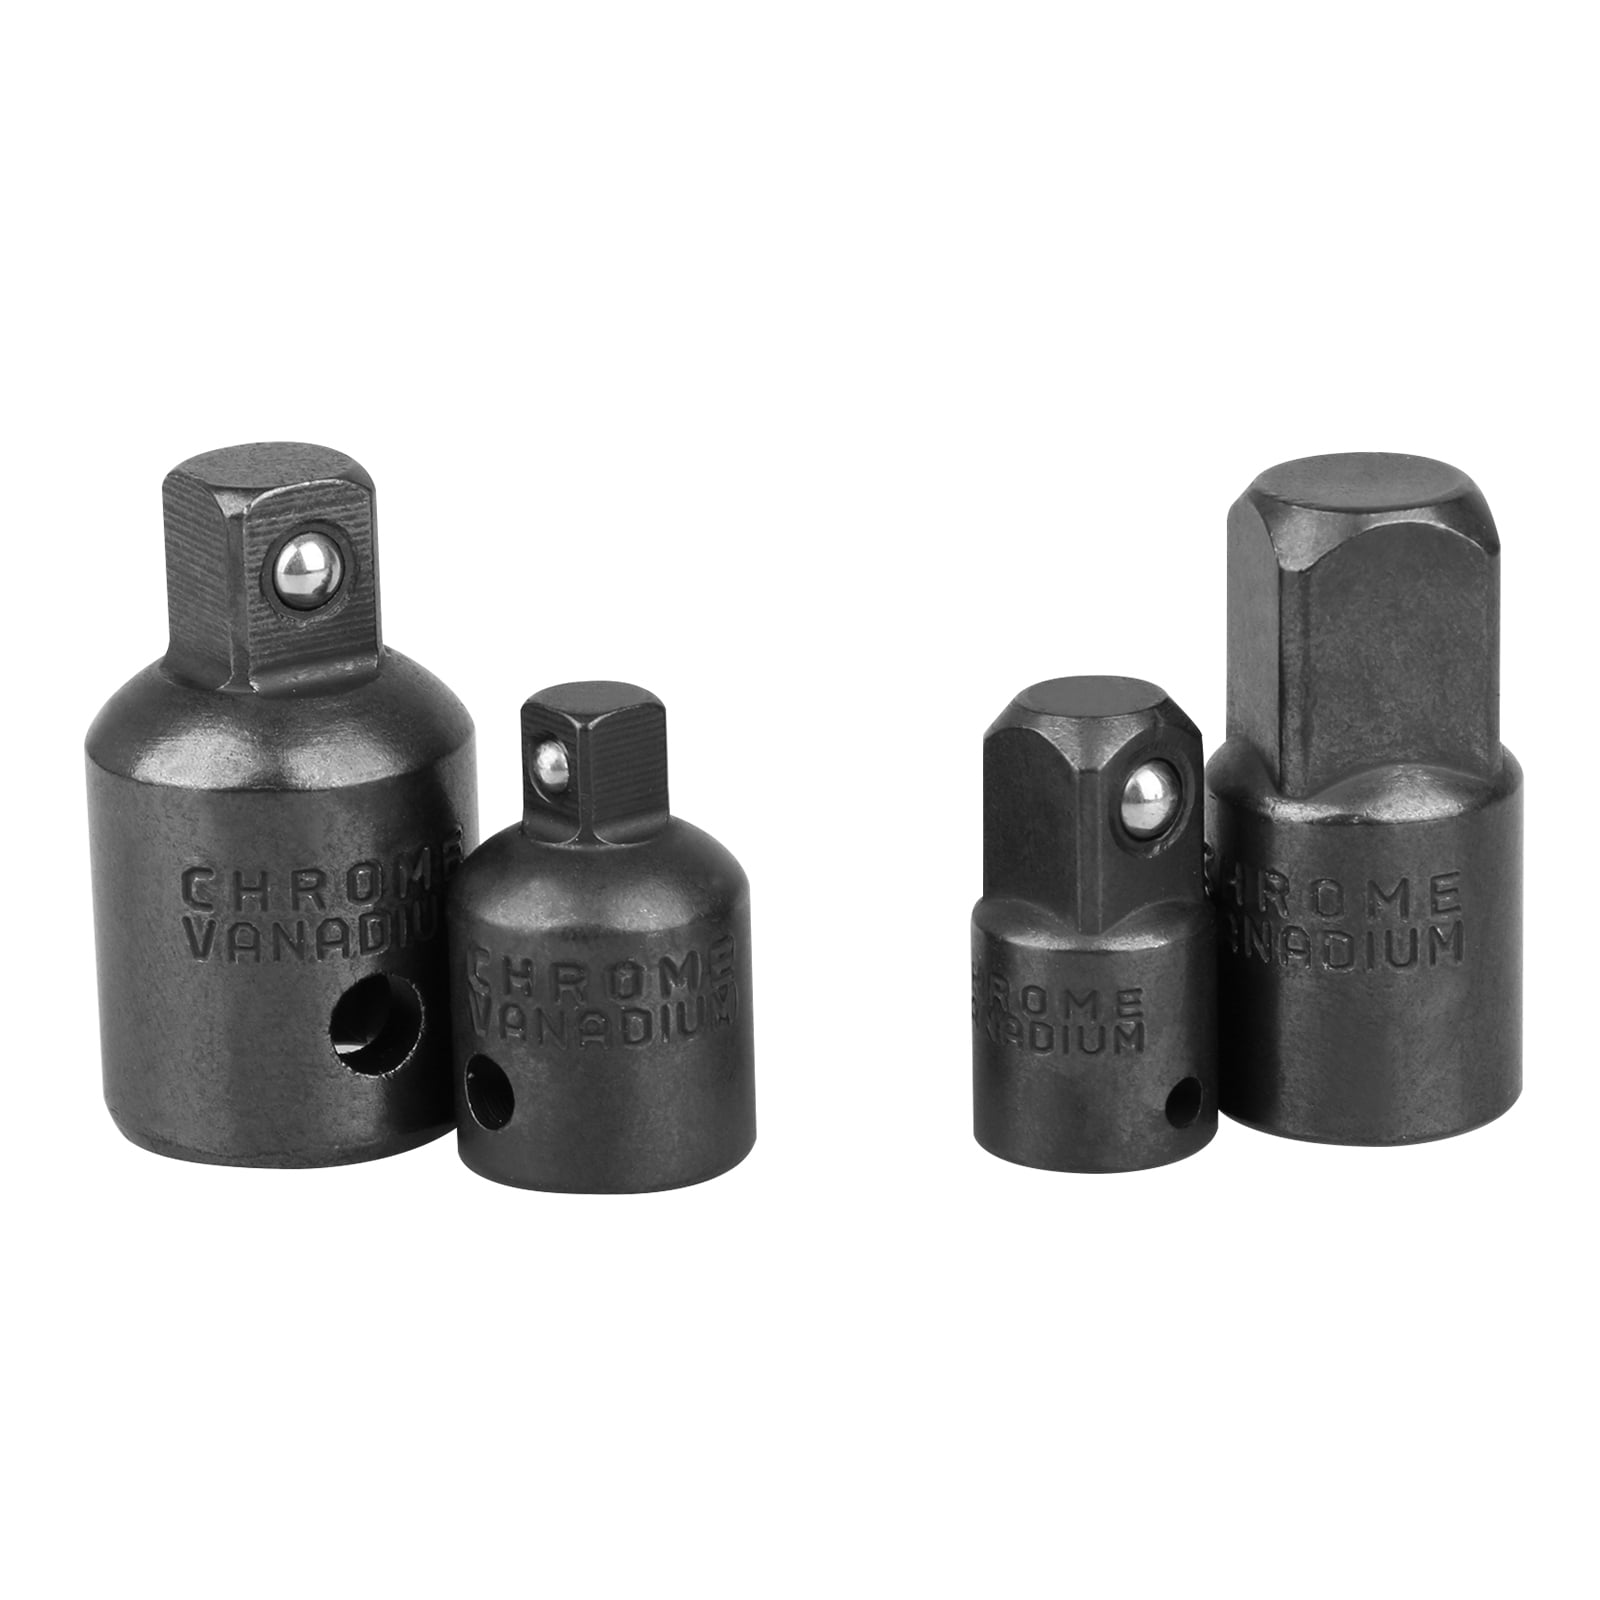 3/8" to 1/4" 1/2 inch Drive Ratchet Socket Adapter Reducer Air Impact Kit